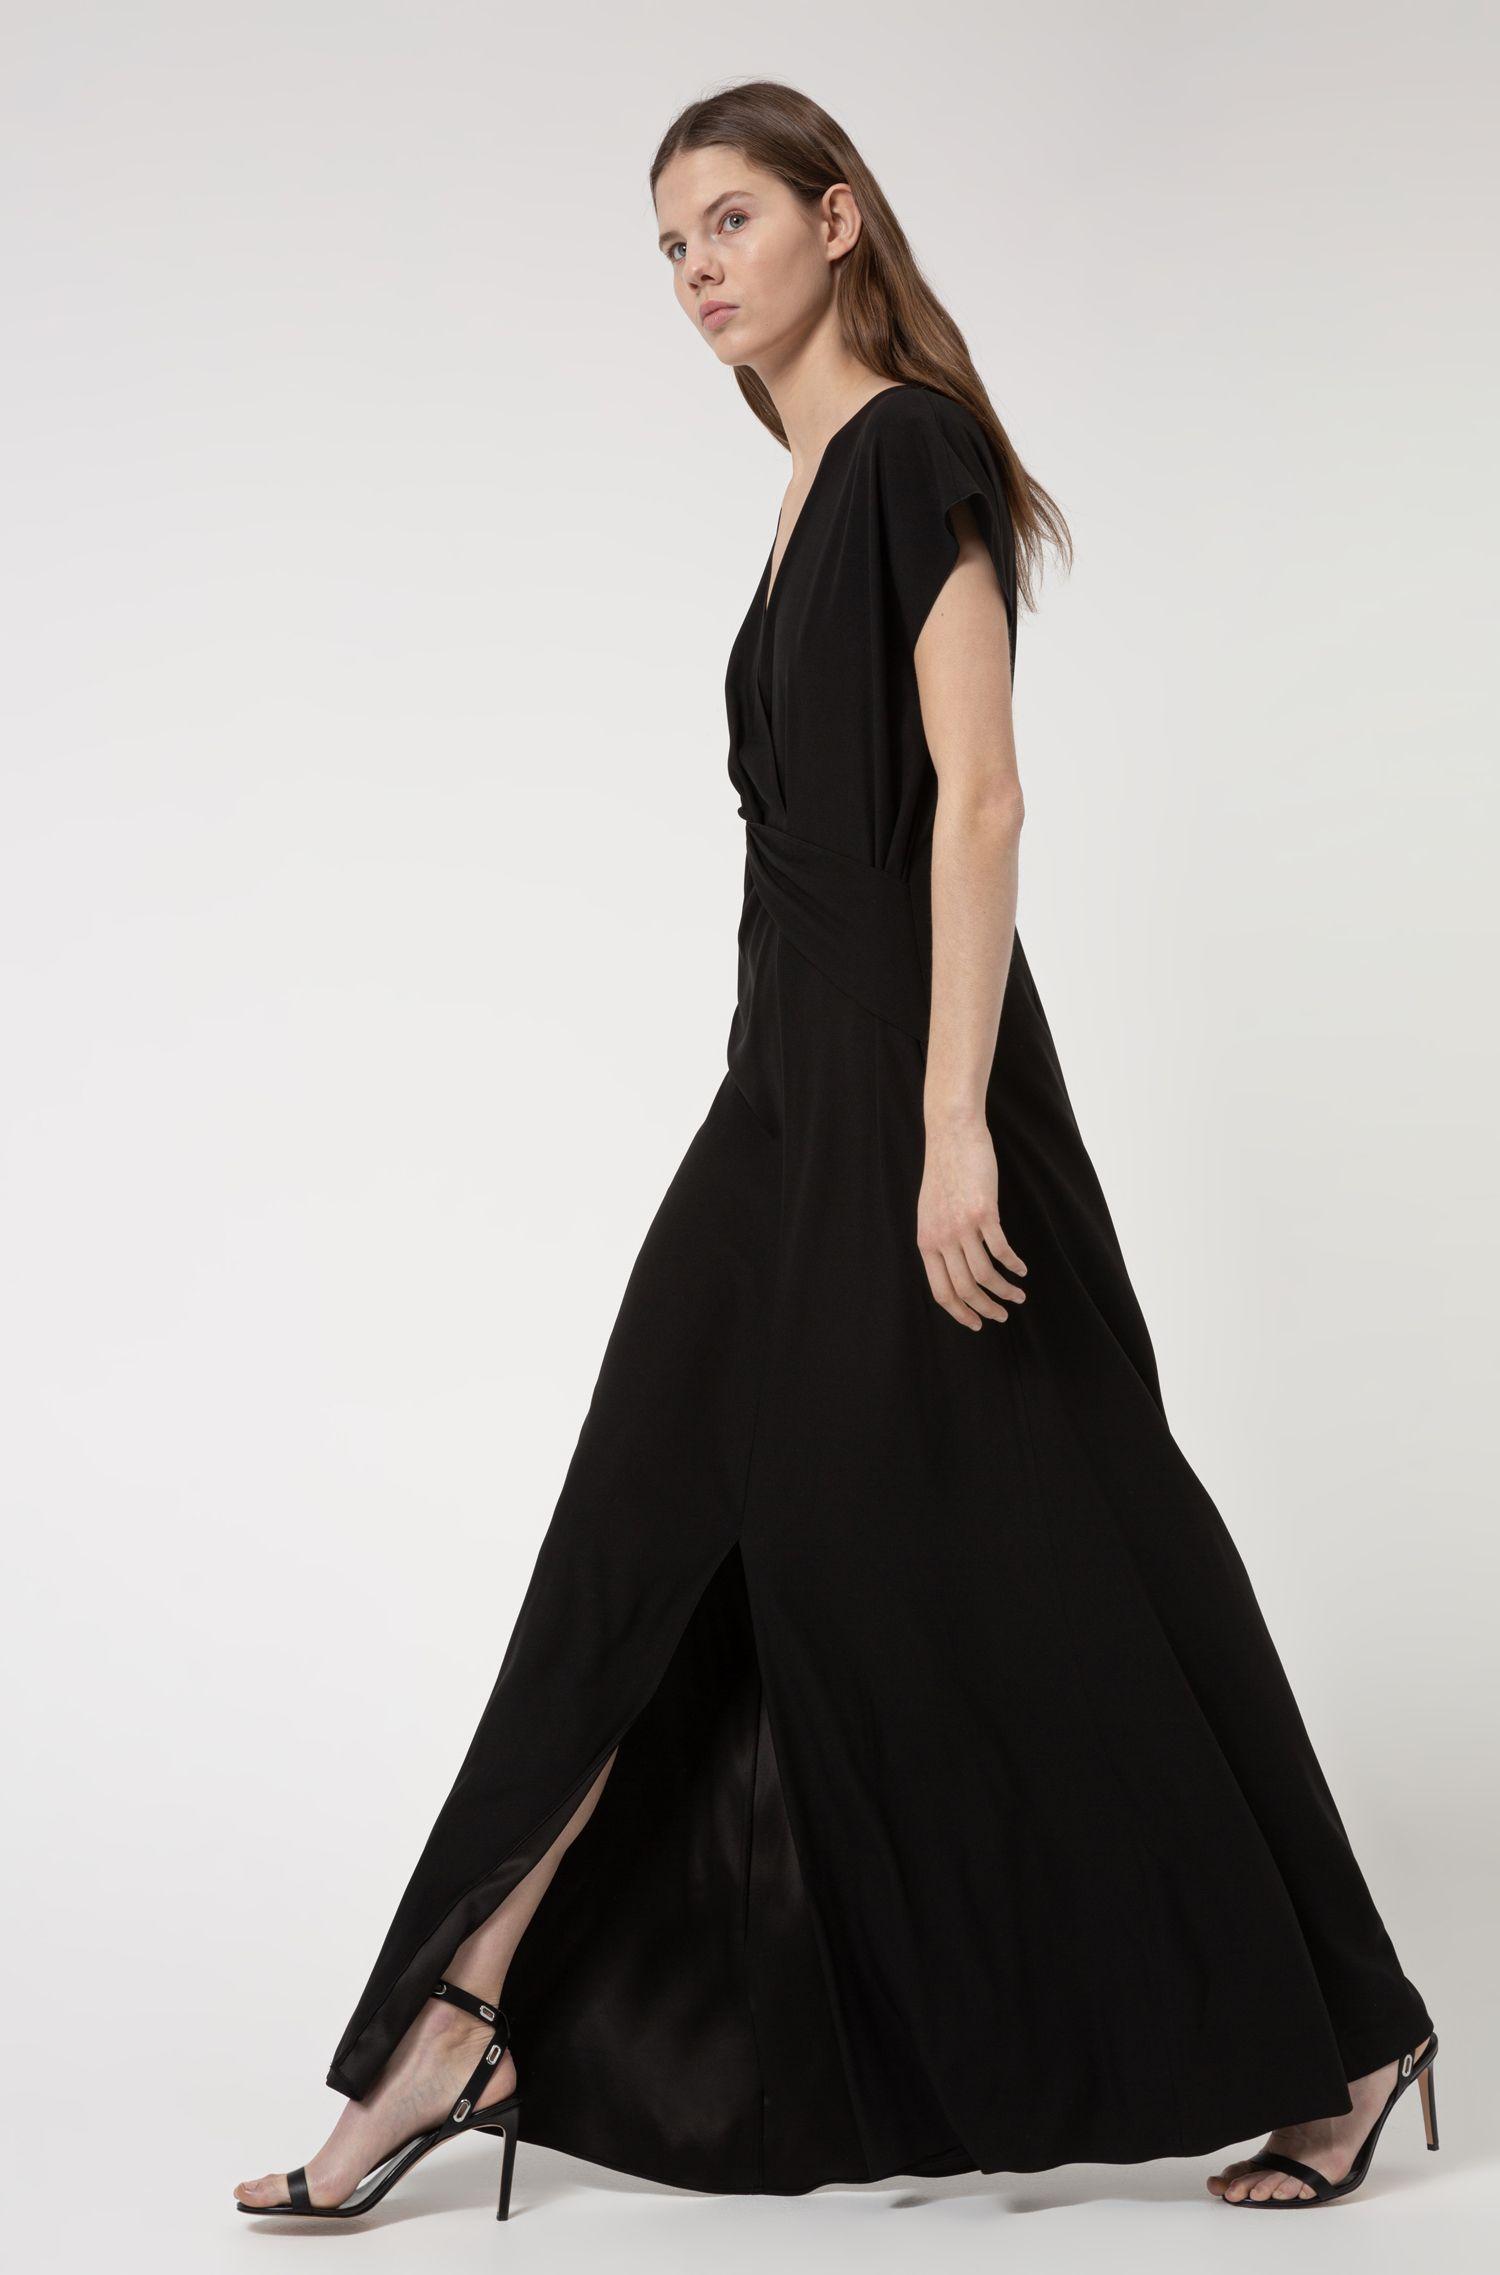 BOSS by Hugo Boss Crepe Maxi Dress With Knotted Front in Black - Lyst